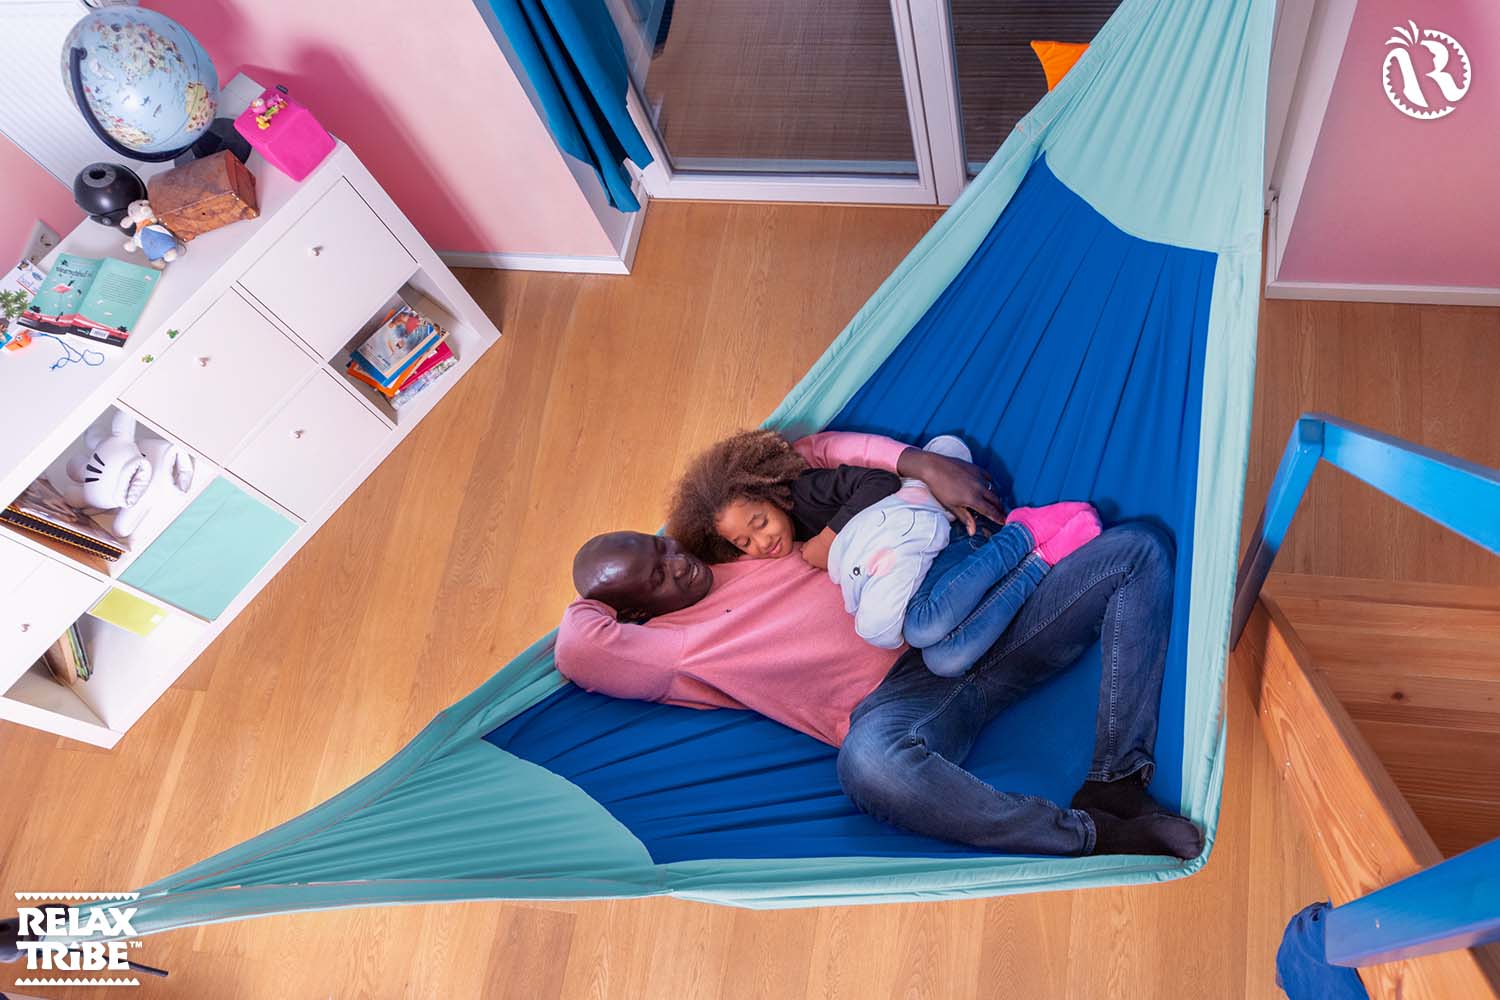 moki-dolphy-double-parent-and-kid-therapy-hammock-pure-organic-cotton-with-suspension-max-160kg-blue-light-turquoise-bedroom